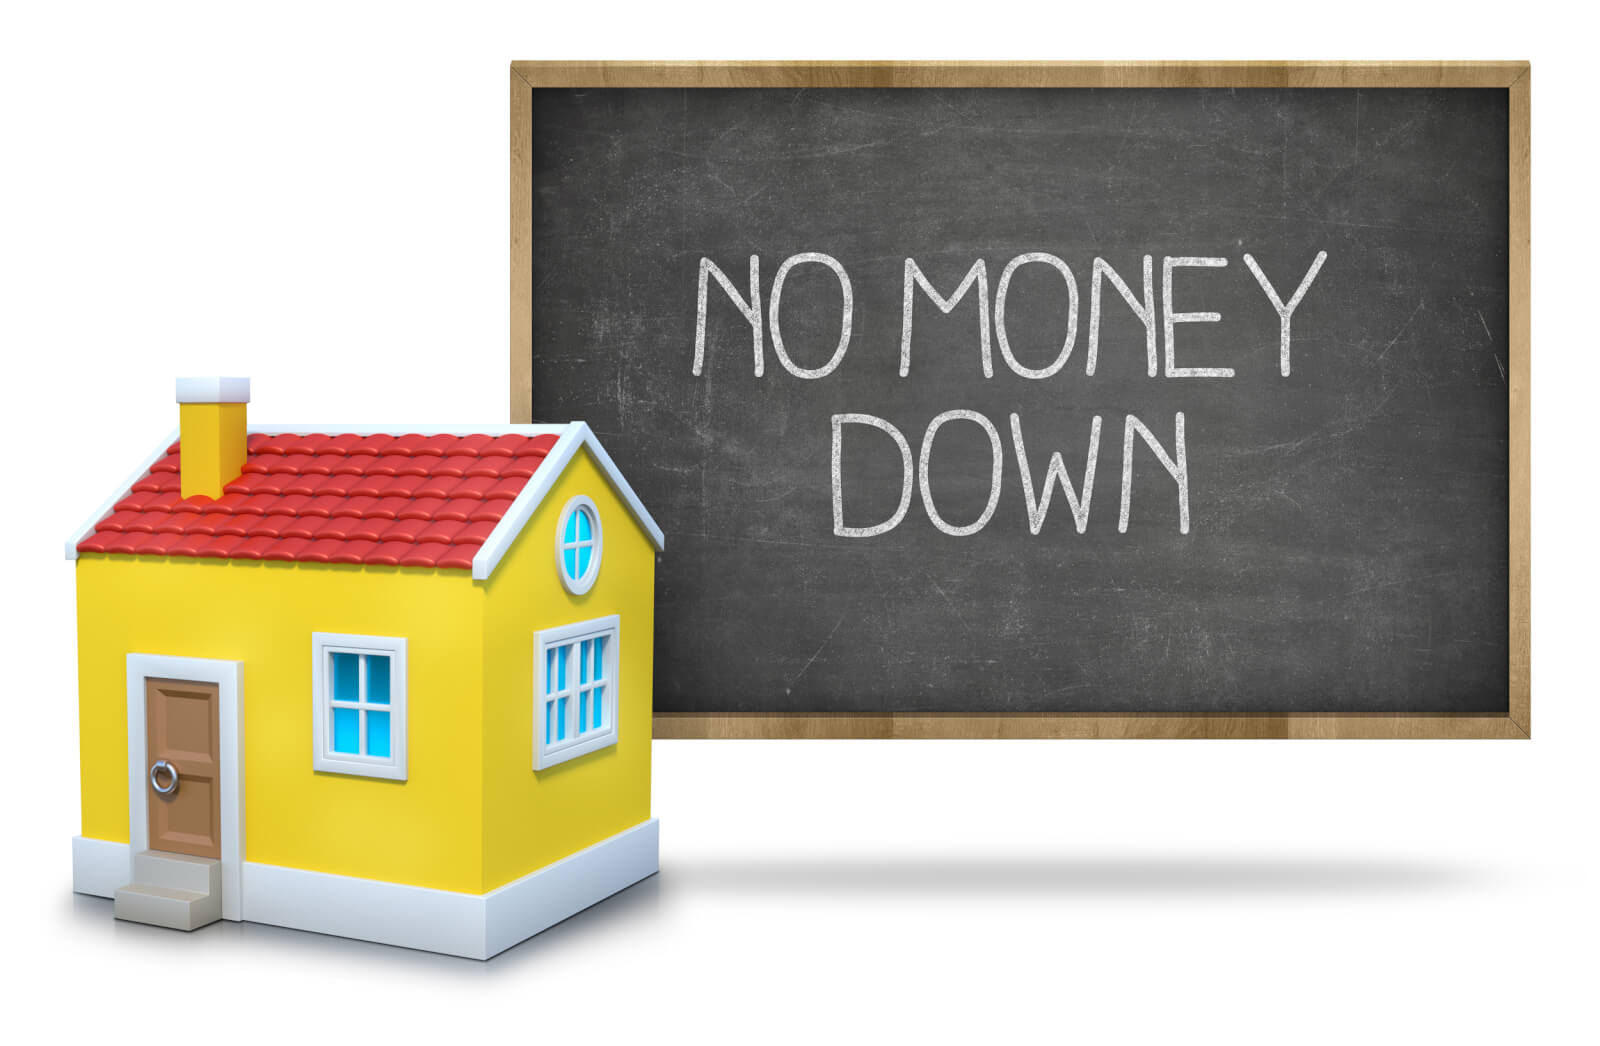 Can You Really Buy Real Estate with “No Money Down”?